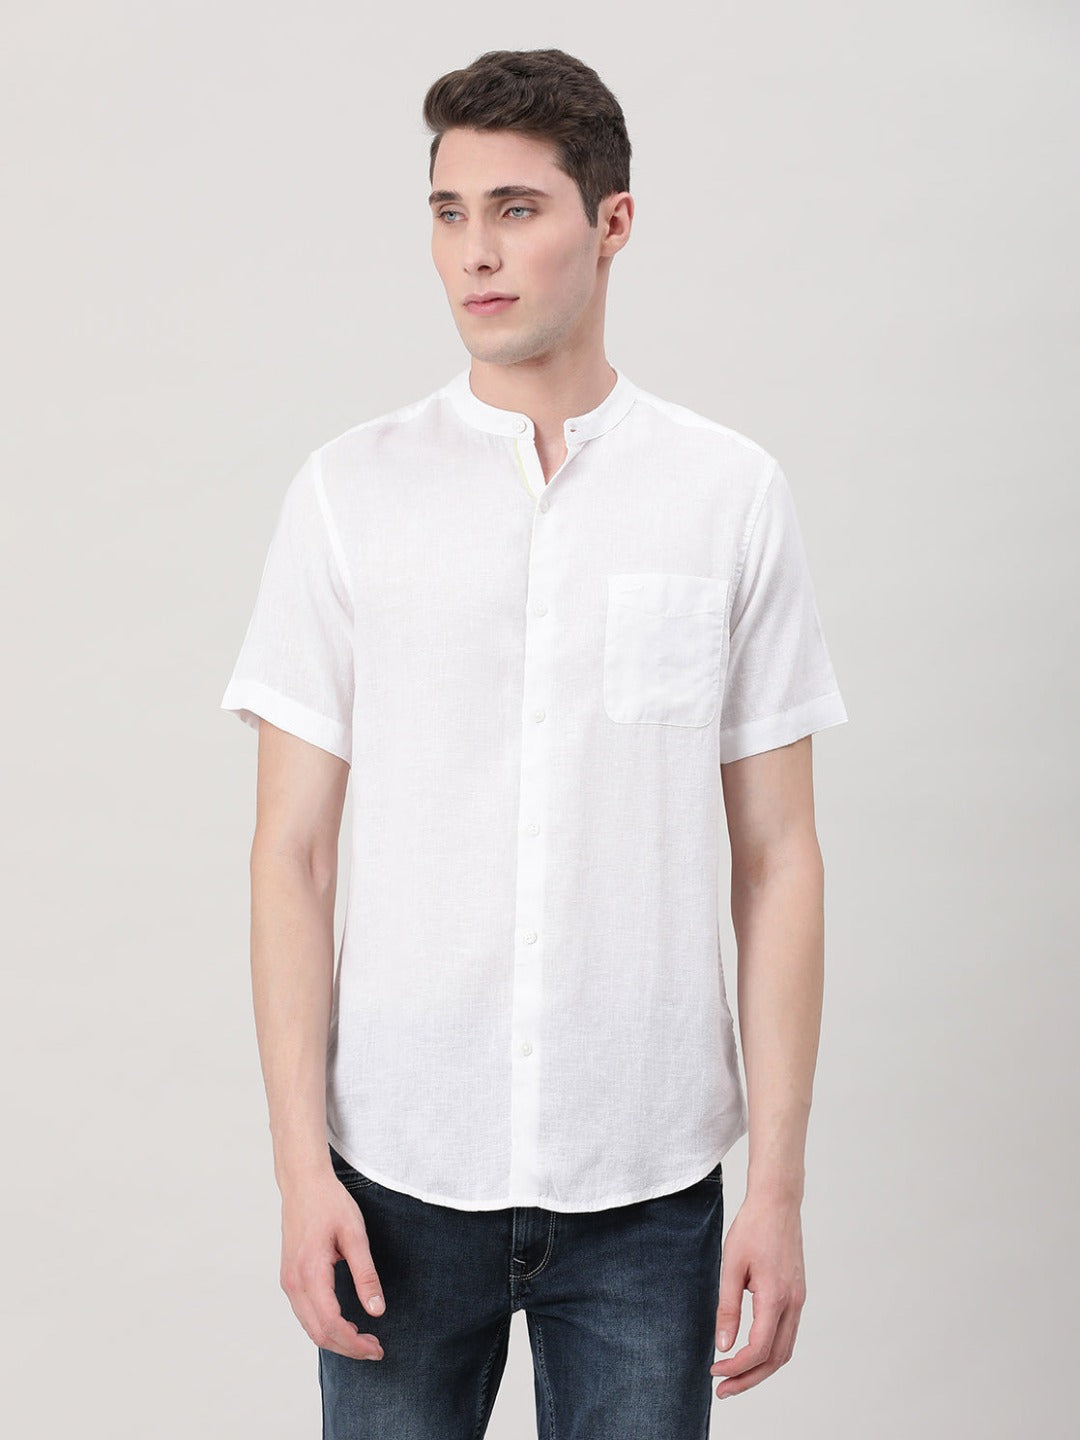 Off White Solid Half Sleeve Shirt